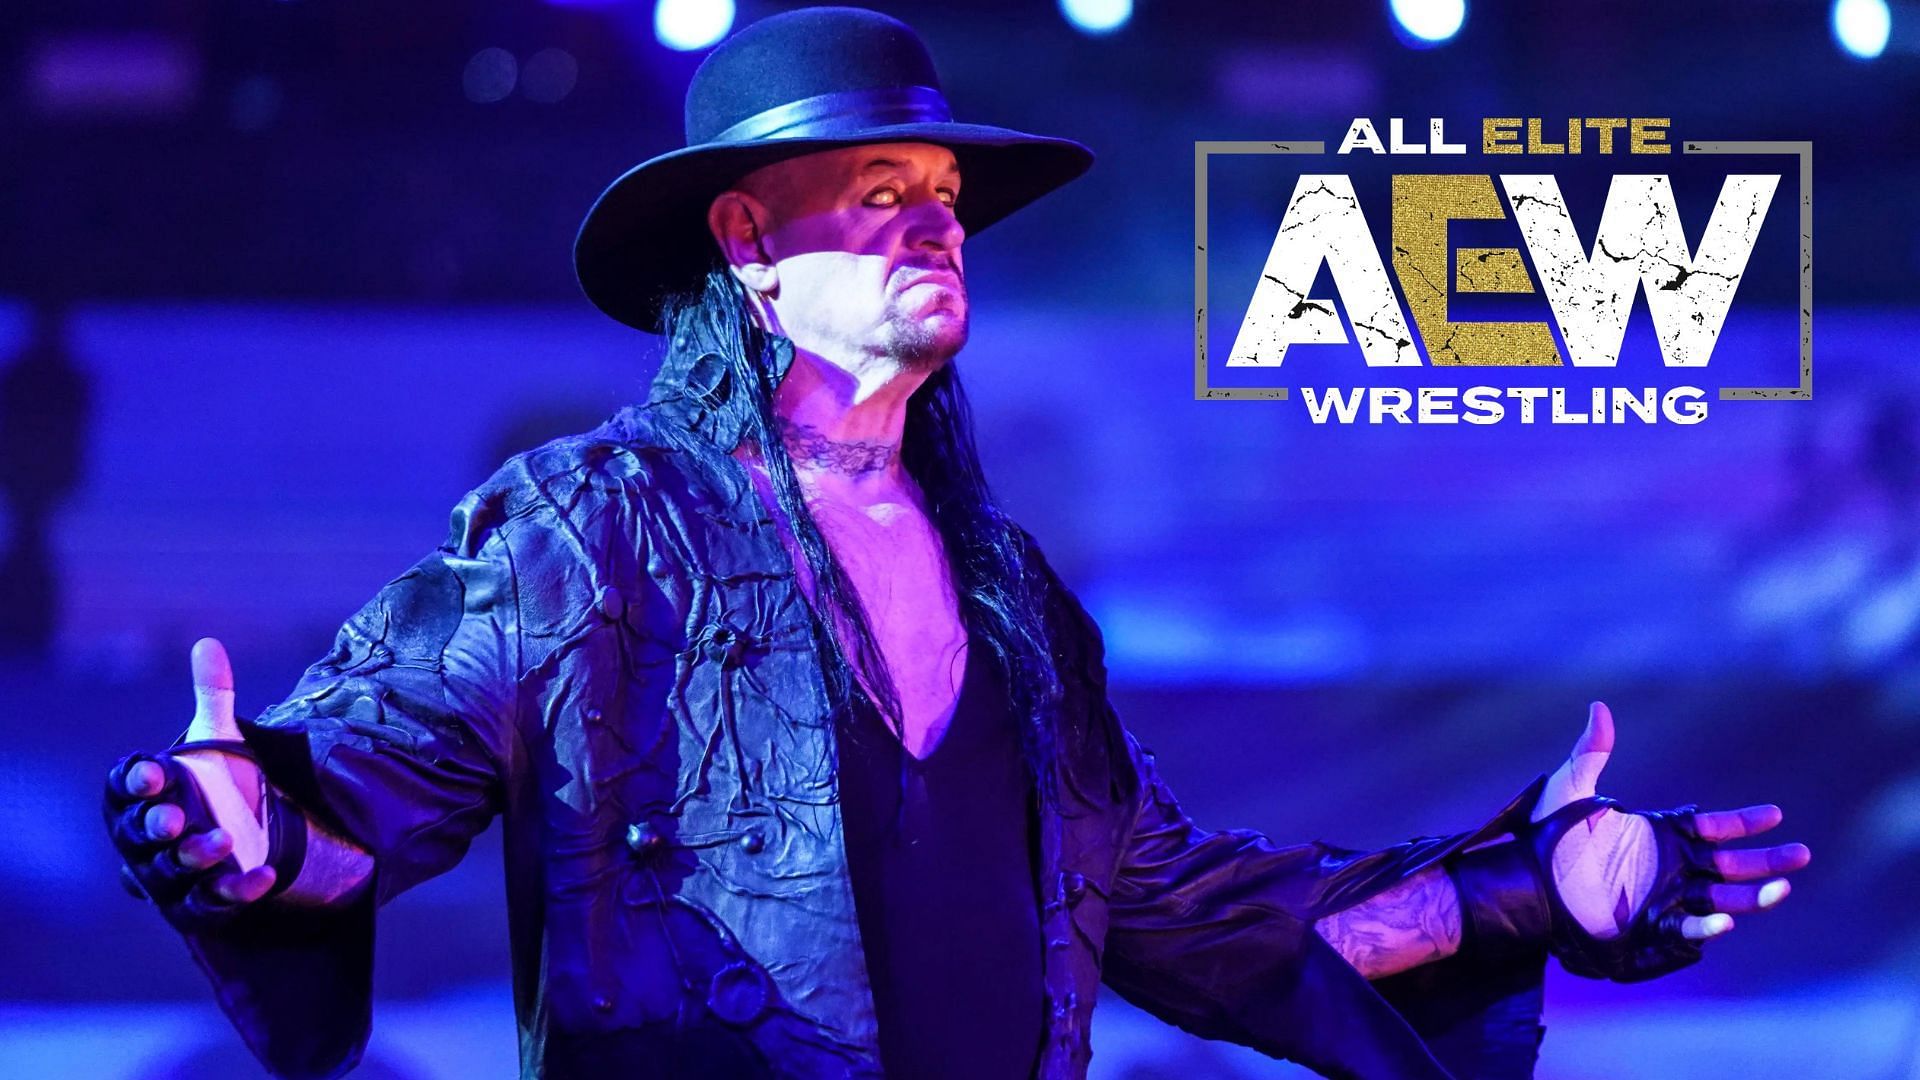 The Undertaker is currently retired